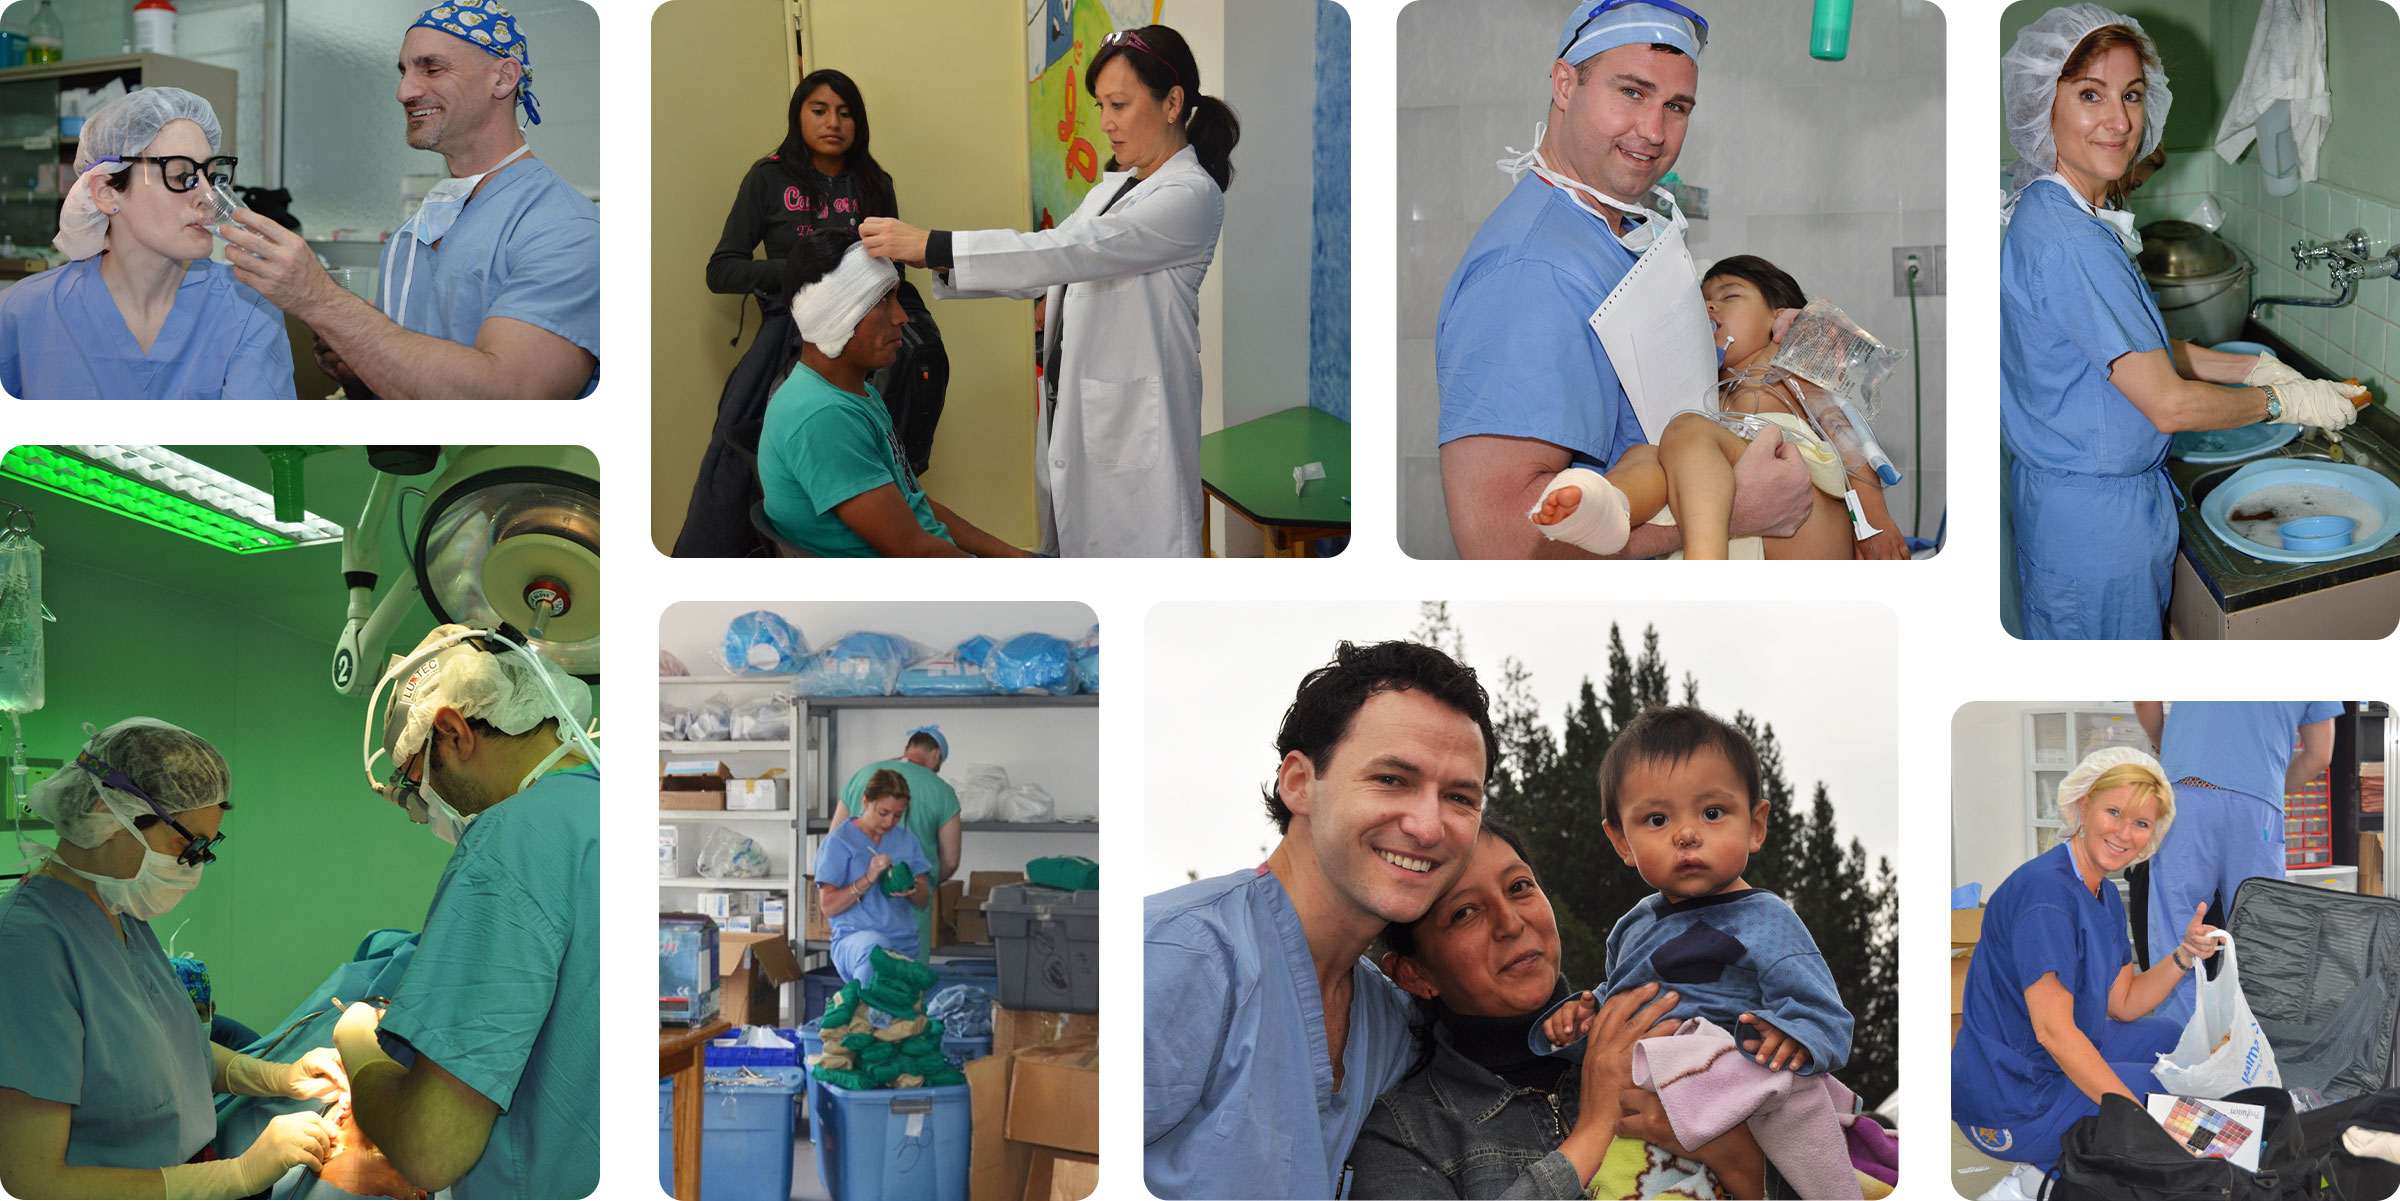 Collage of images for a week in the life of a mission